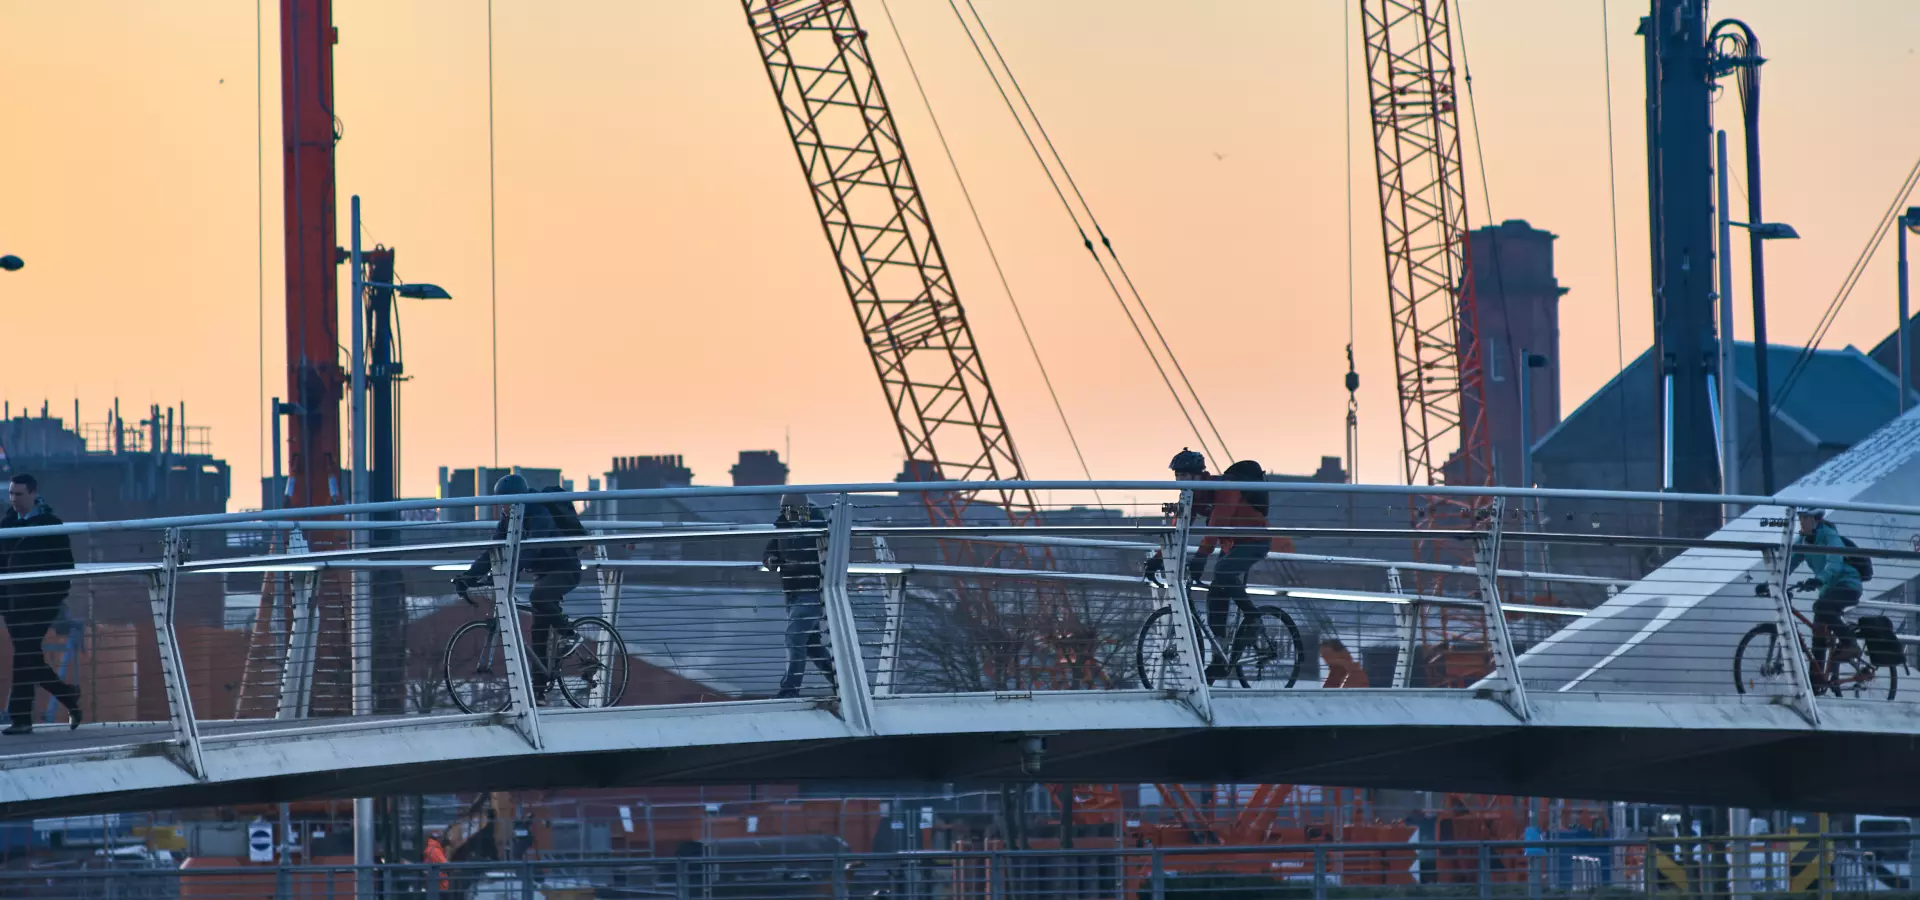 Cyclists and pedestrians crossing one of the pedestrian bridges in Glagsow, with cranes in the background.